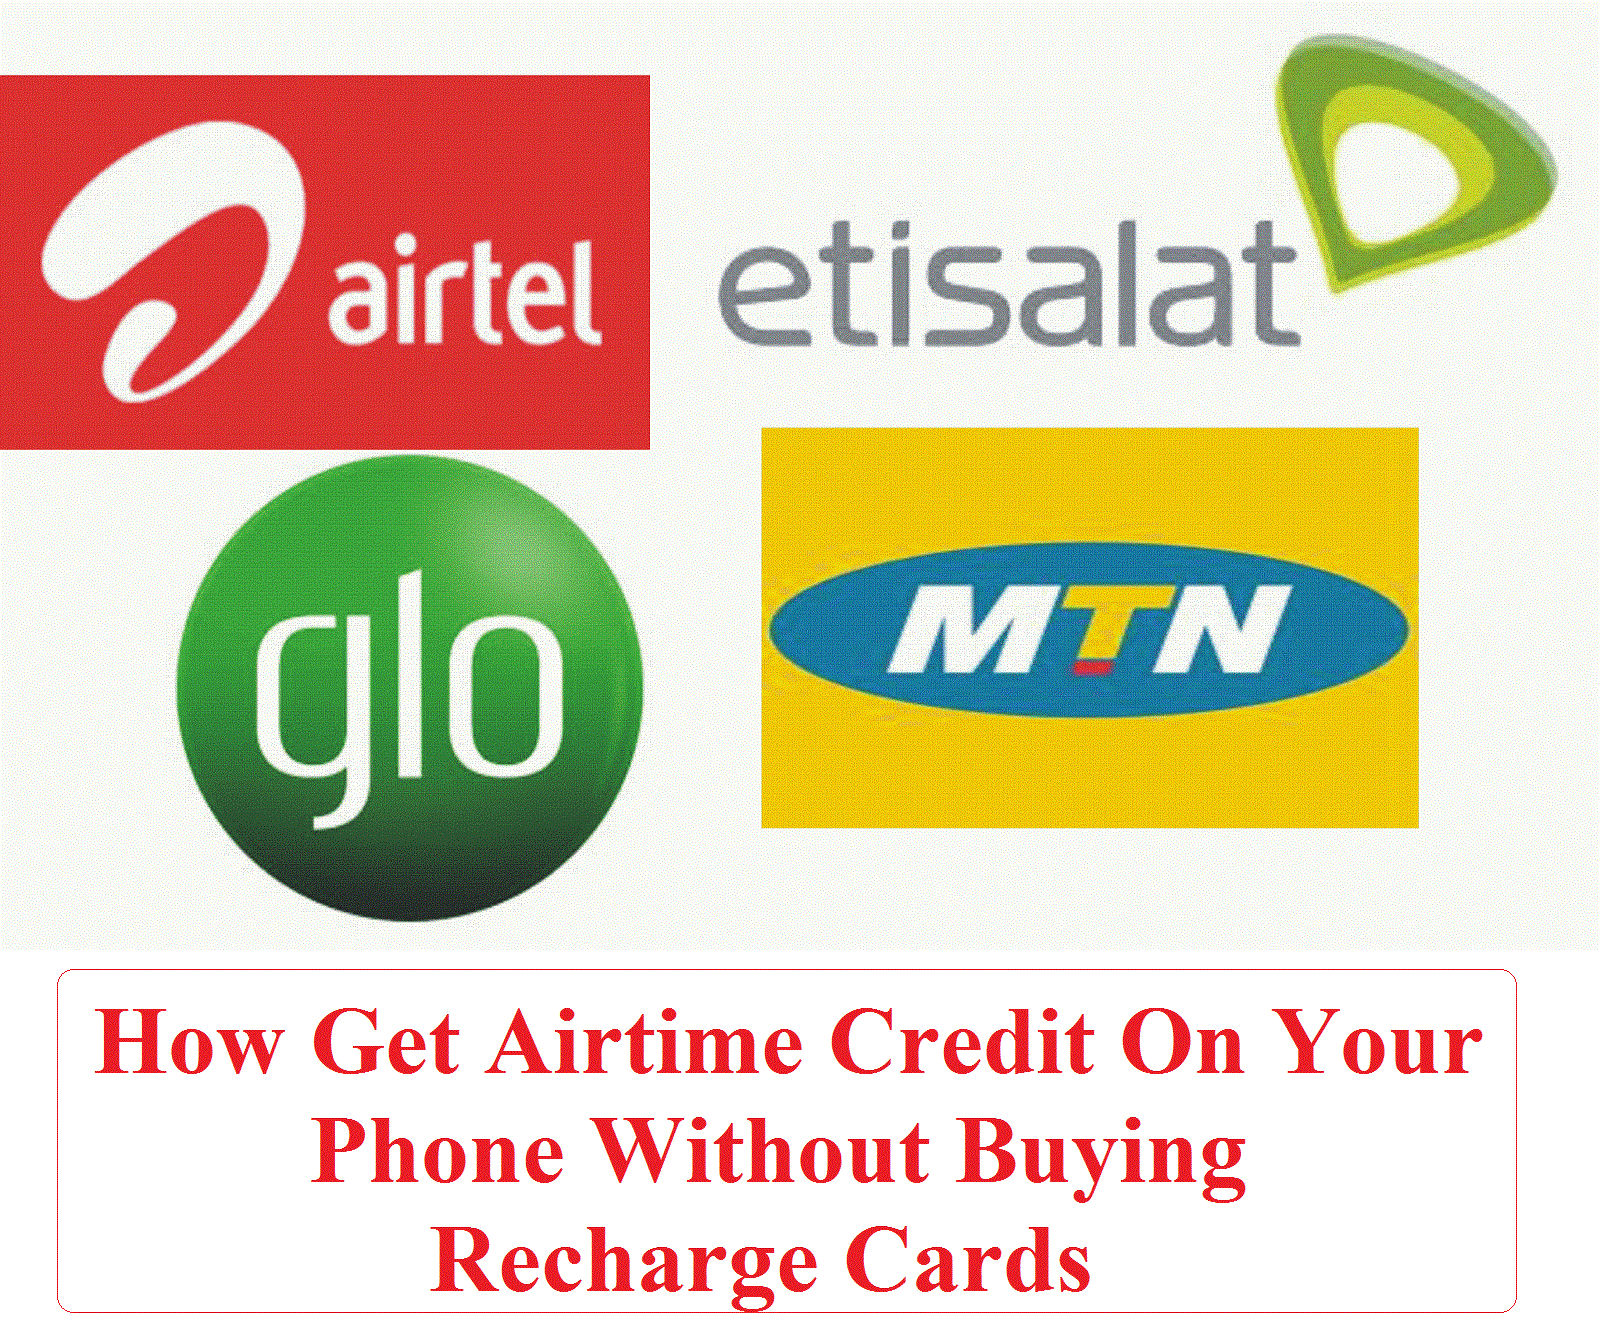 How To Get Airtime Credit On Your Phone Without Buying Recharge Cards | DELSUBLOG